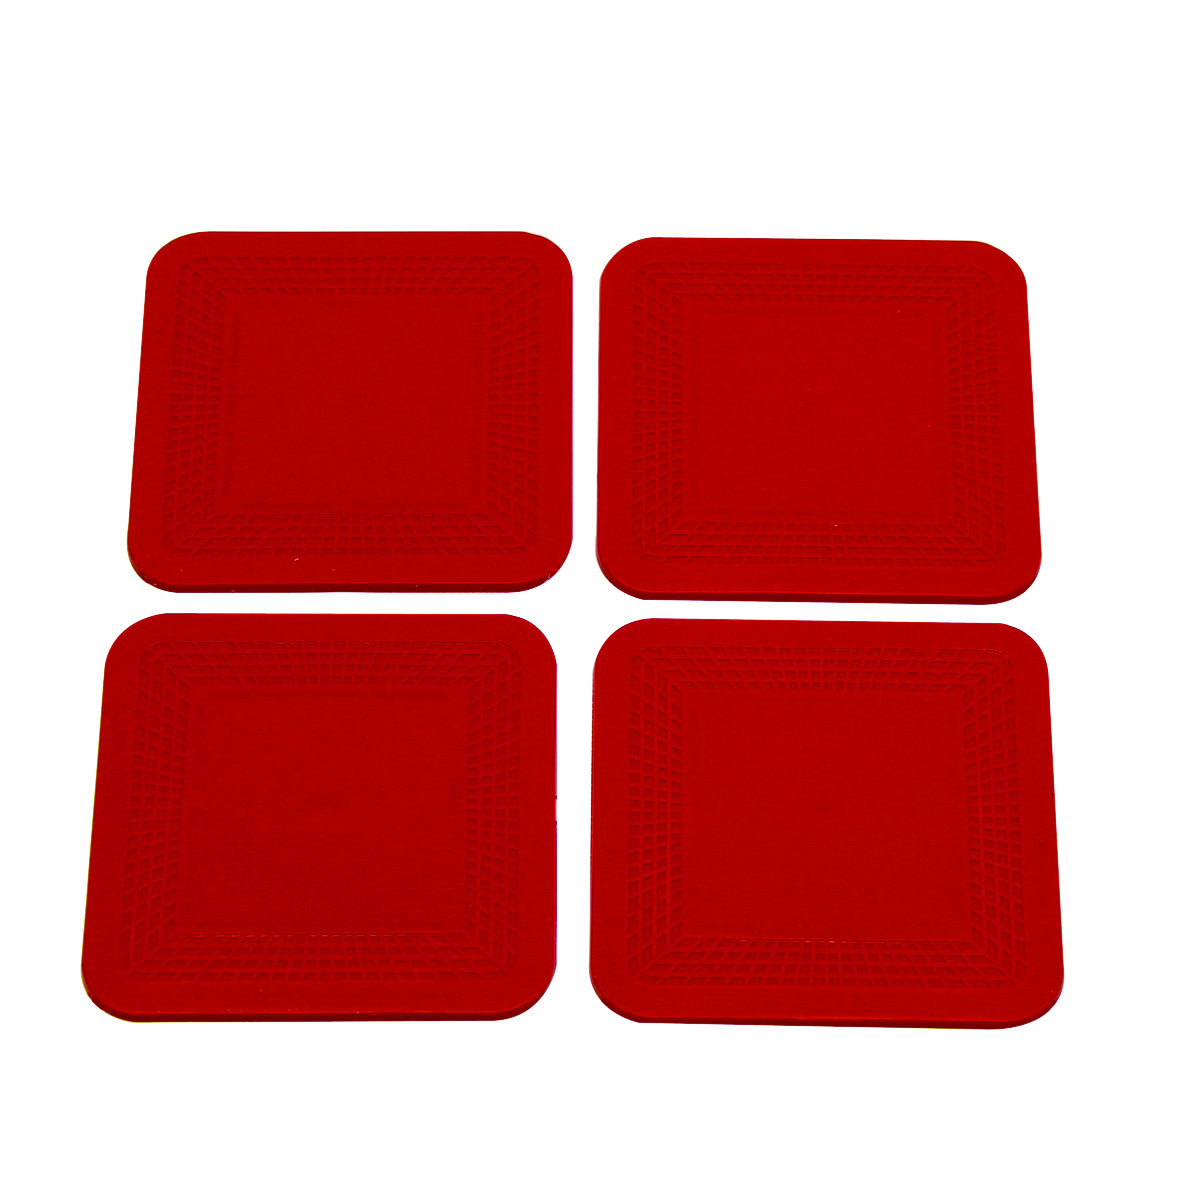 Dycem 50-1670R Non-Slip Square Coasters, Red - Set of 4